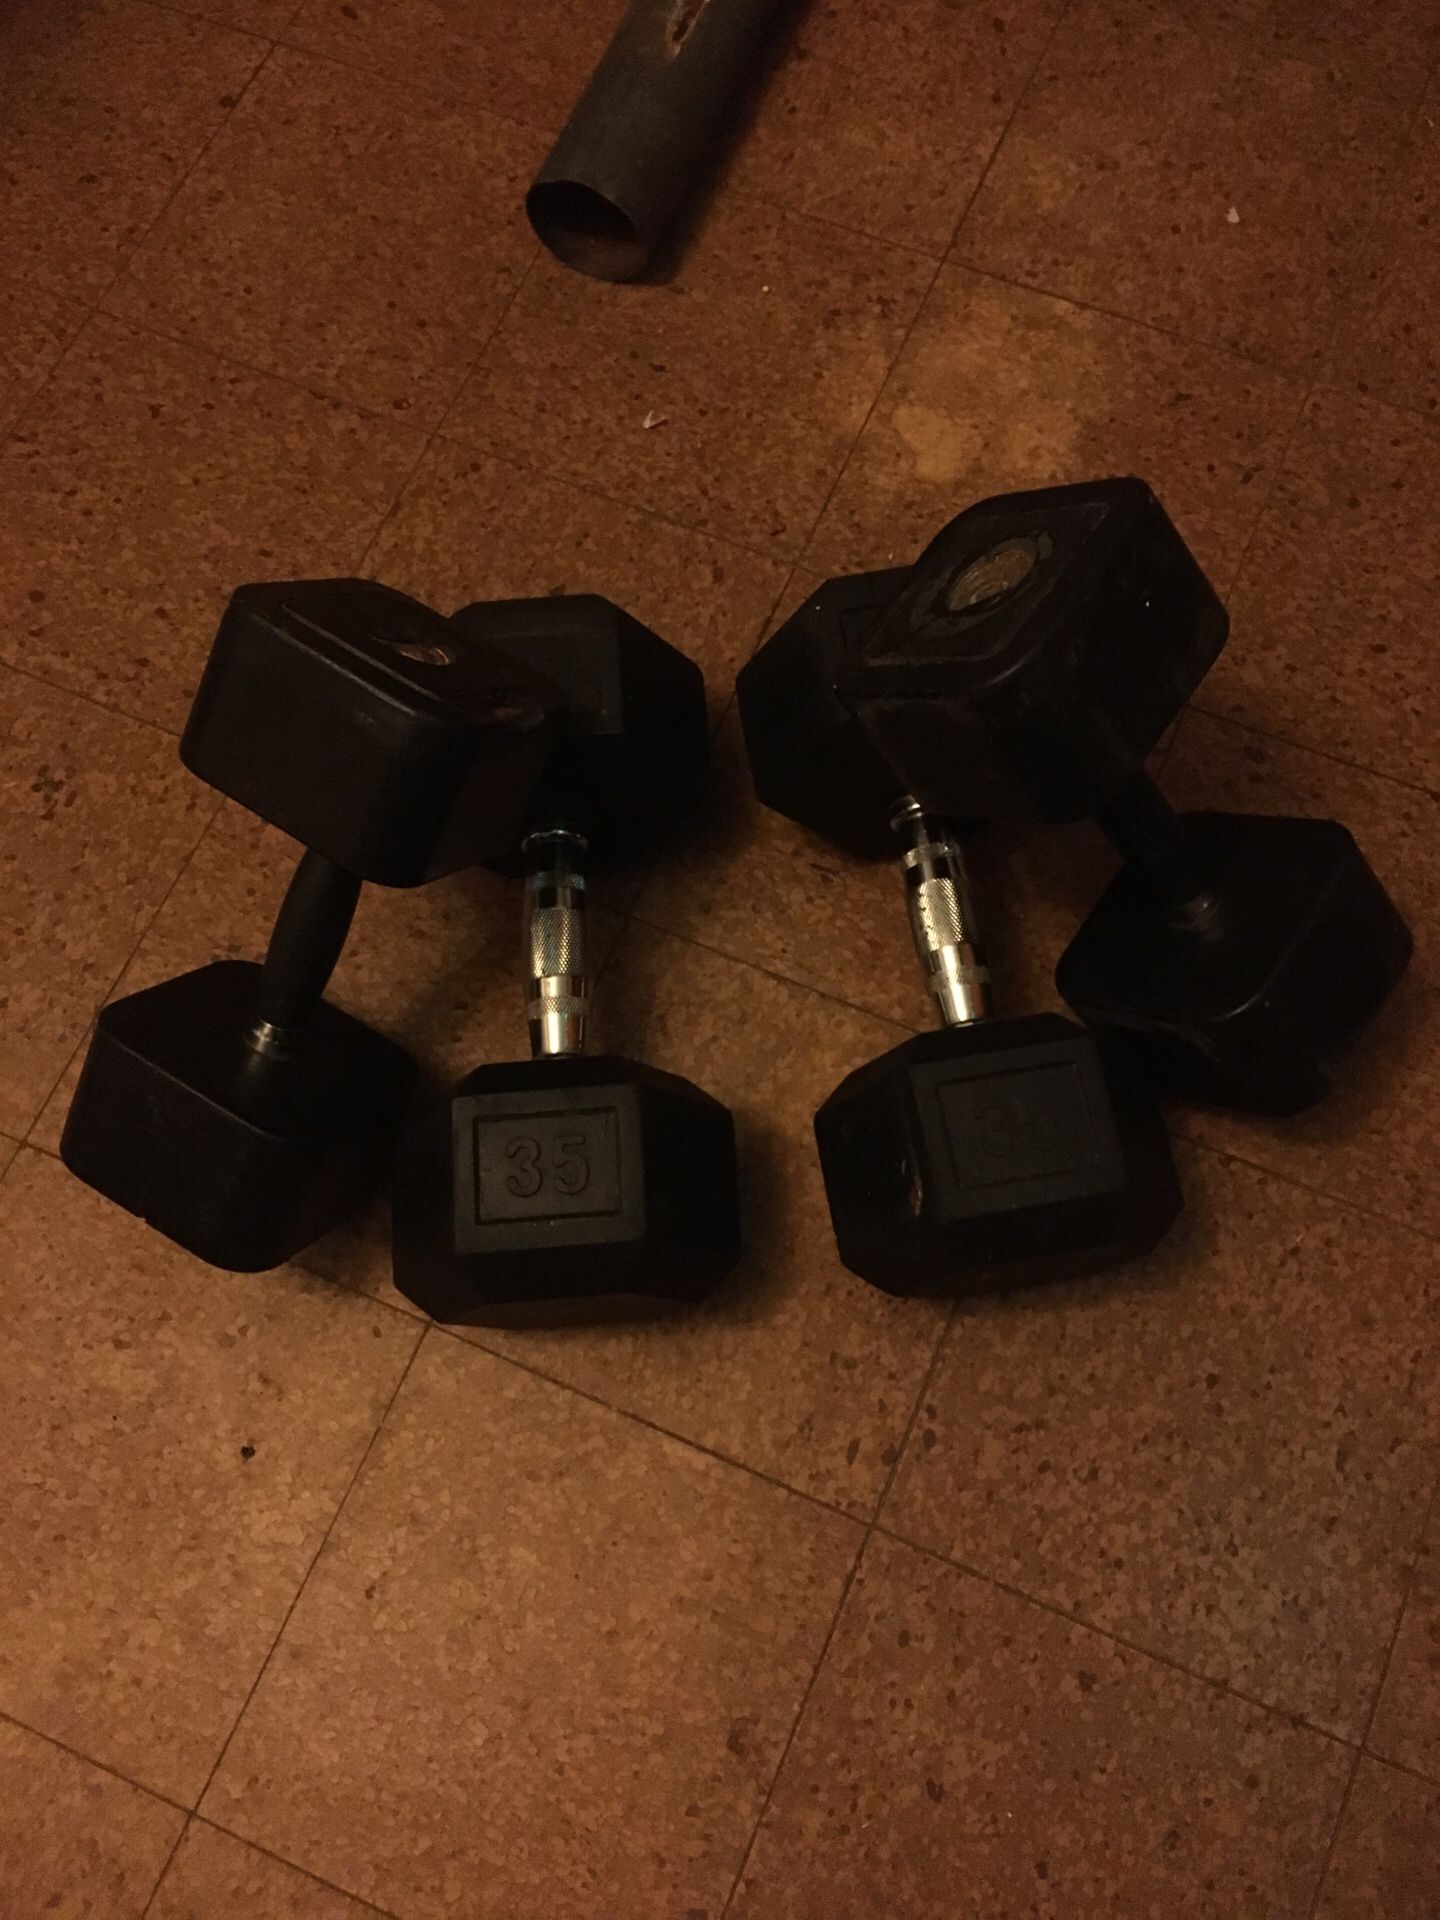 Two 35 and two 25 dumbbells